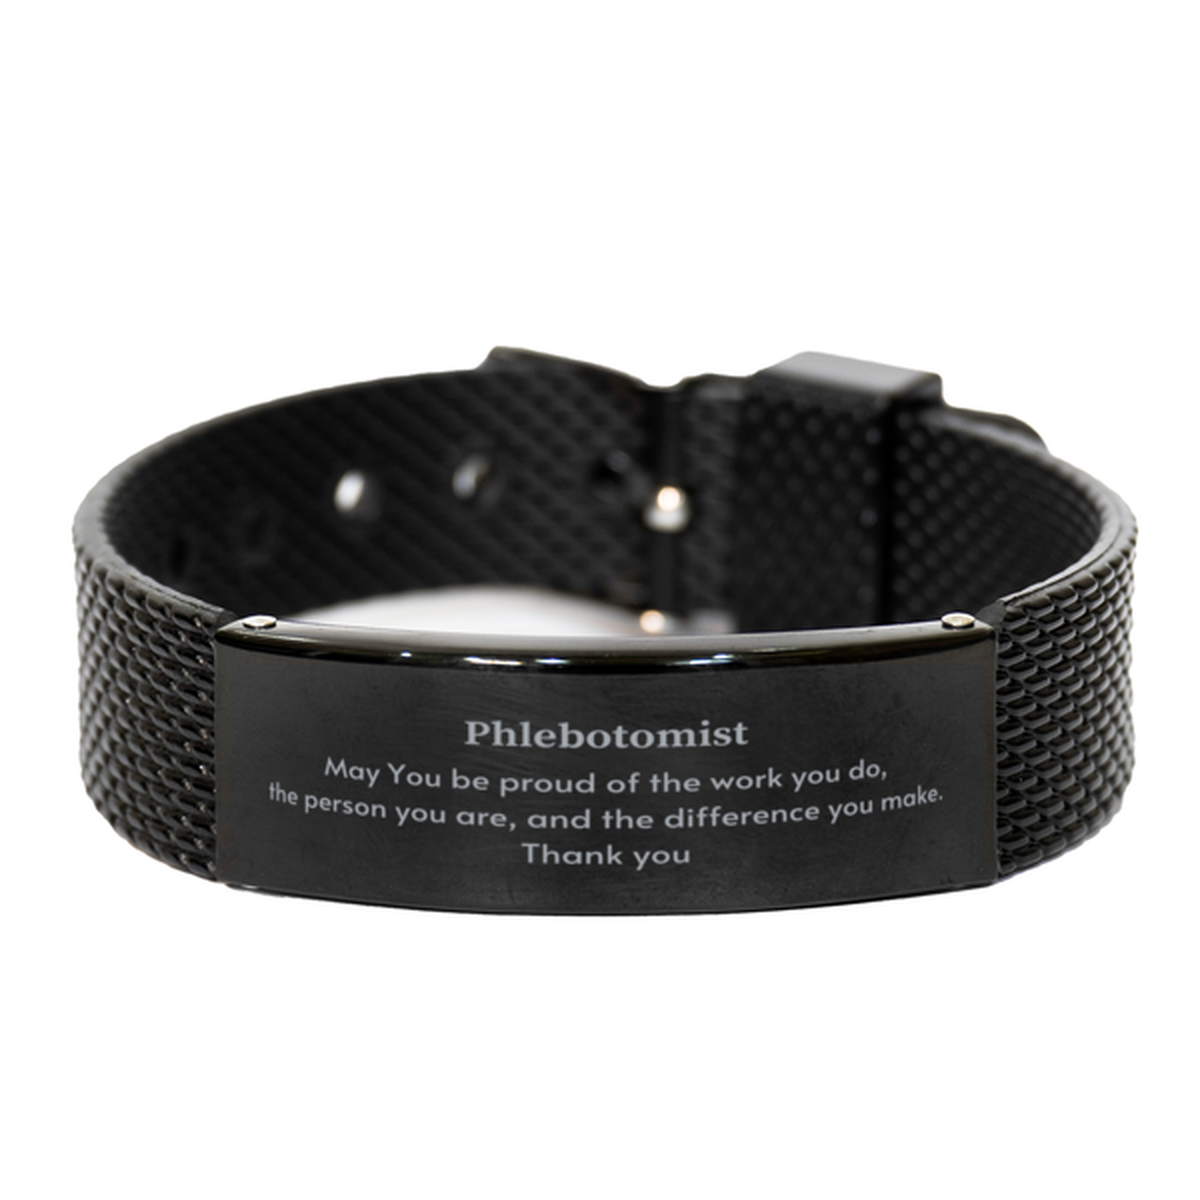 Heartwarming Black Shark Mesh Bracelet Retirement Coworkers Gifts for Phlebotomist, Phlebotomist May You be proud of the work you do, the person you are Gifts for Boss Men Women Friends